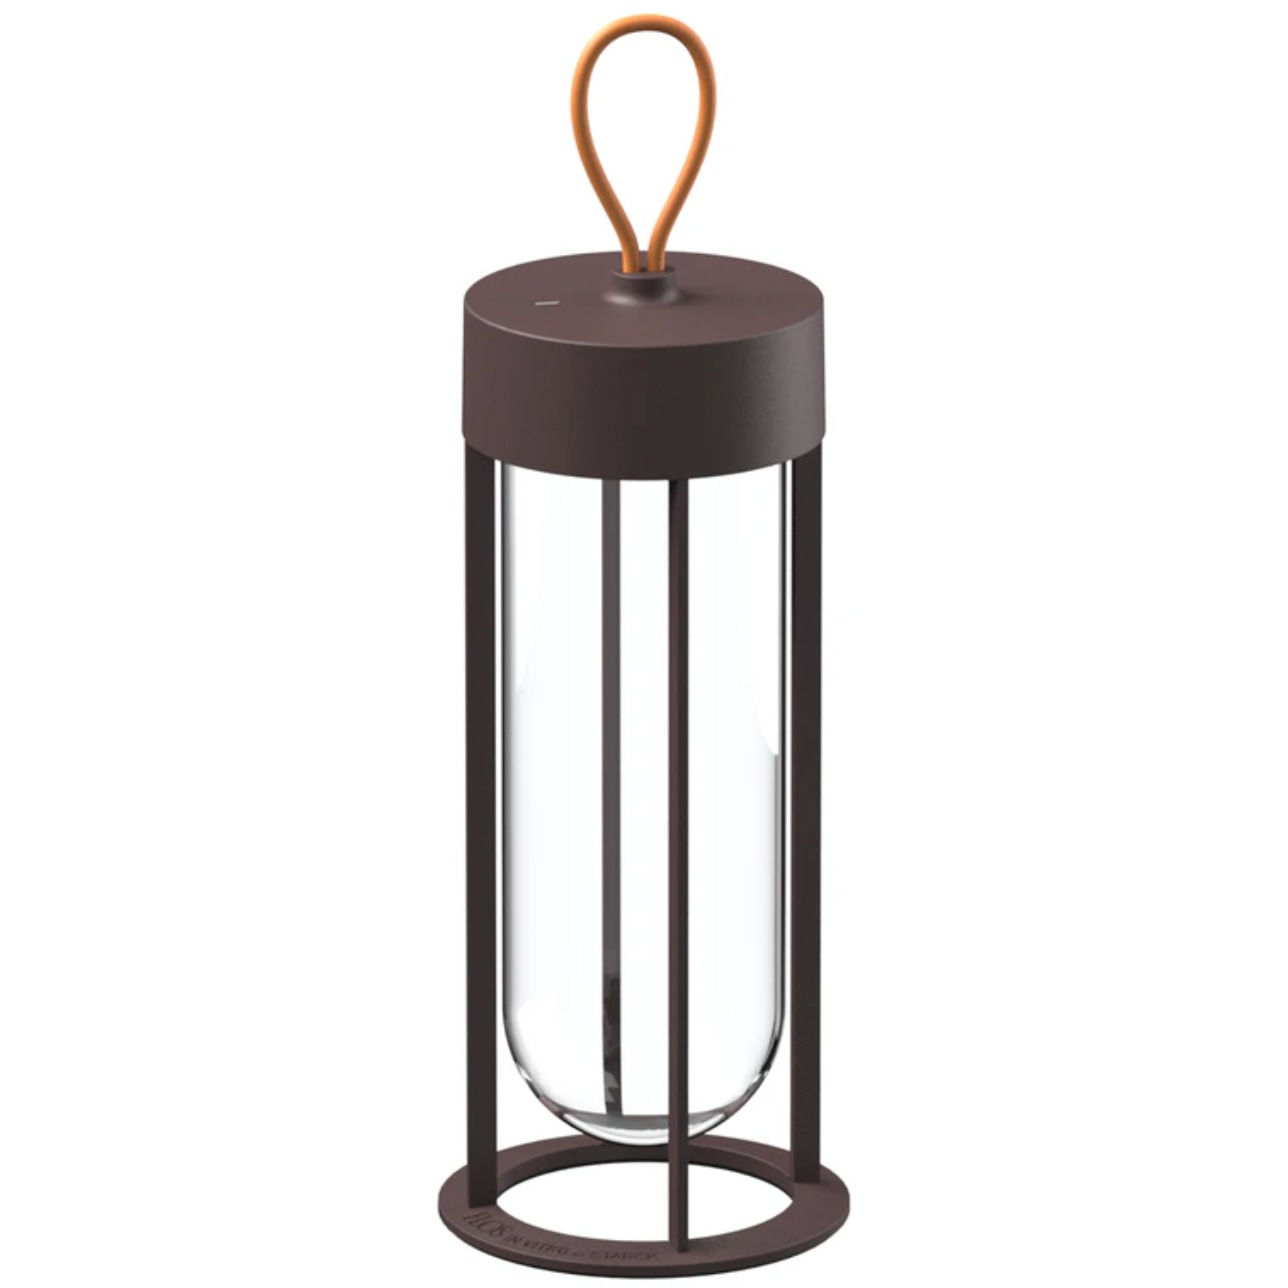 In Vitro Unplugged Table Lamp, Deep Brown